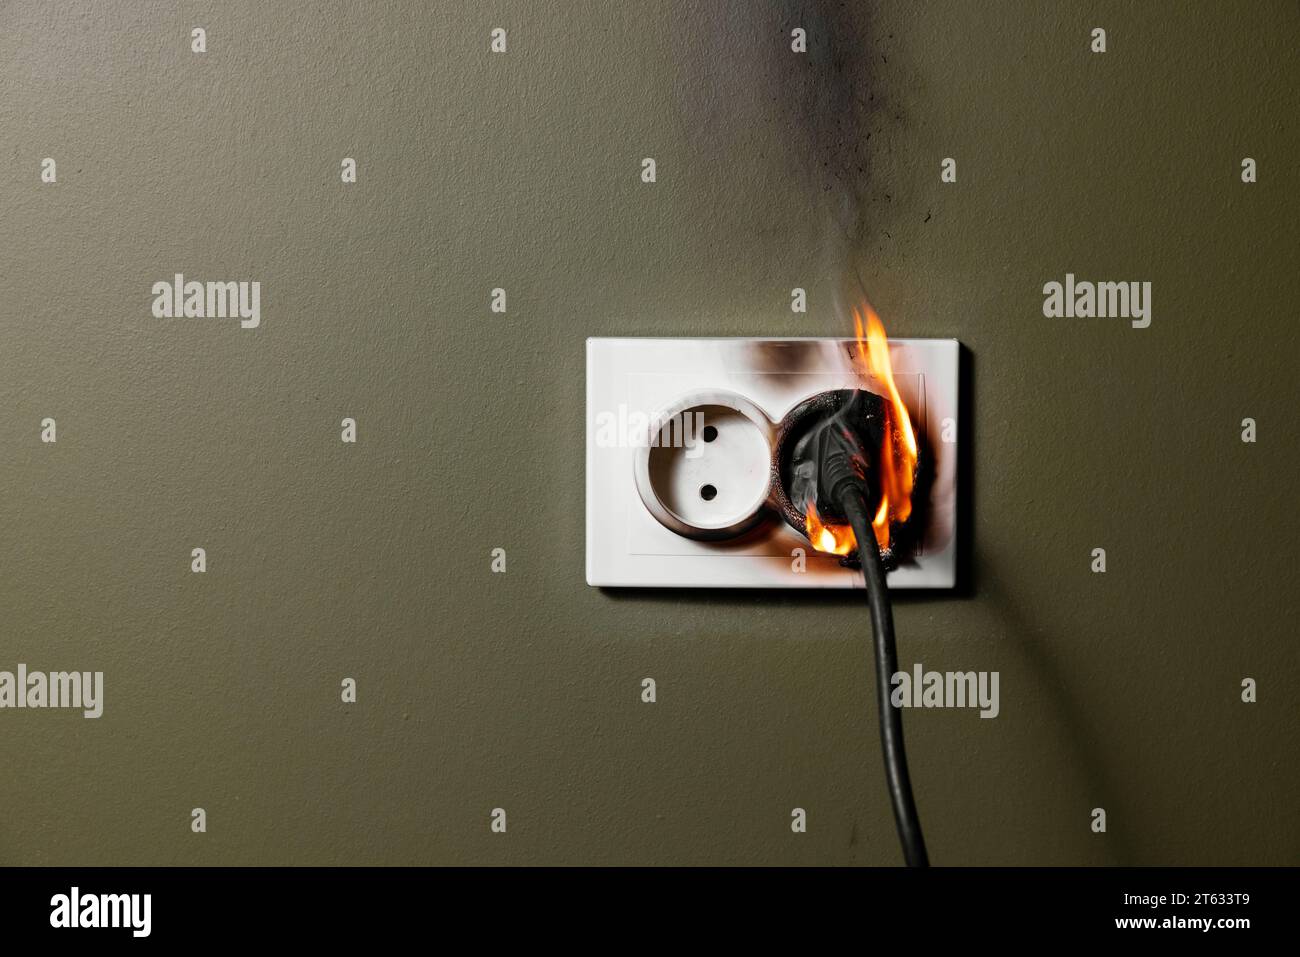 burning wall electrical socket with plugged appliance cable from short circuit in house. concept of fire safety and power overload at home Stock Photo